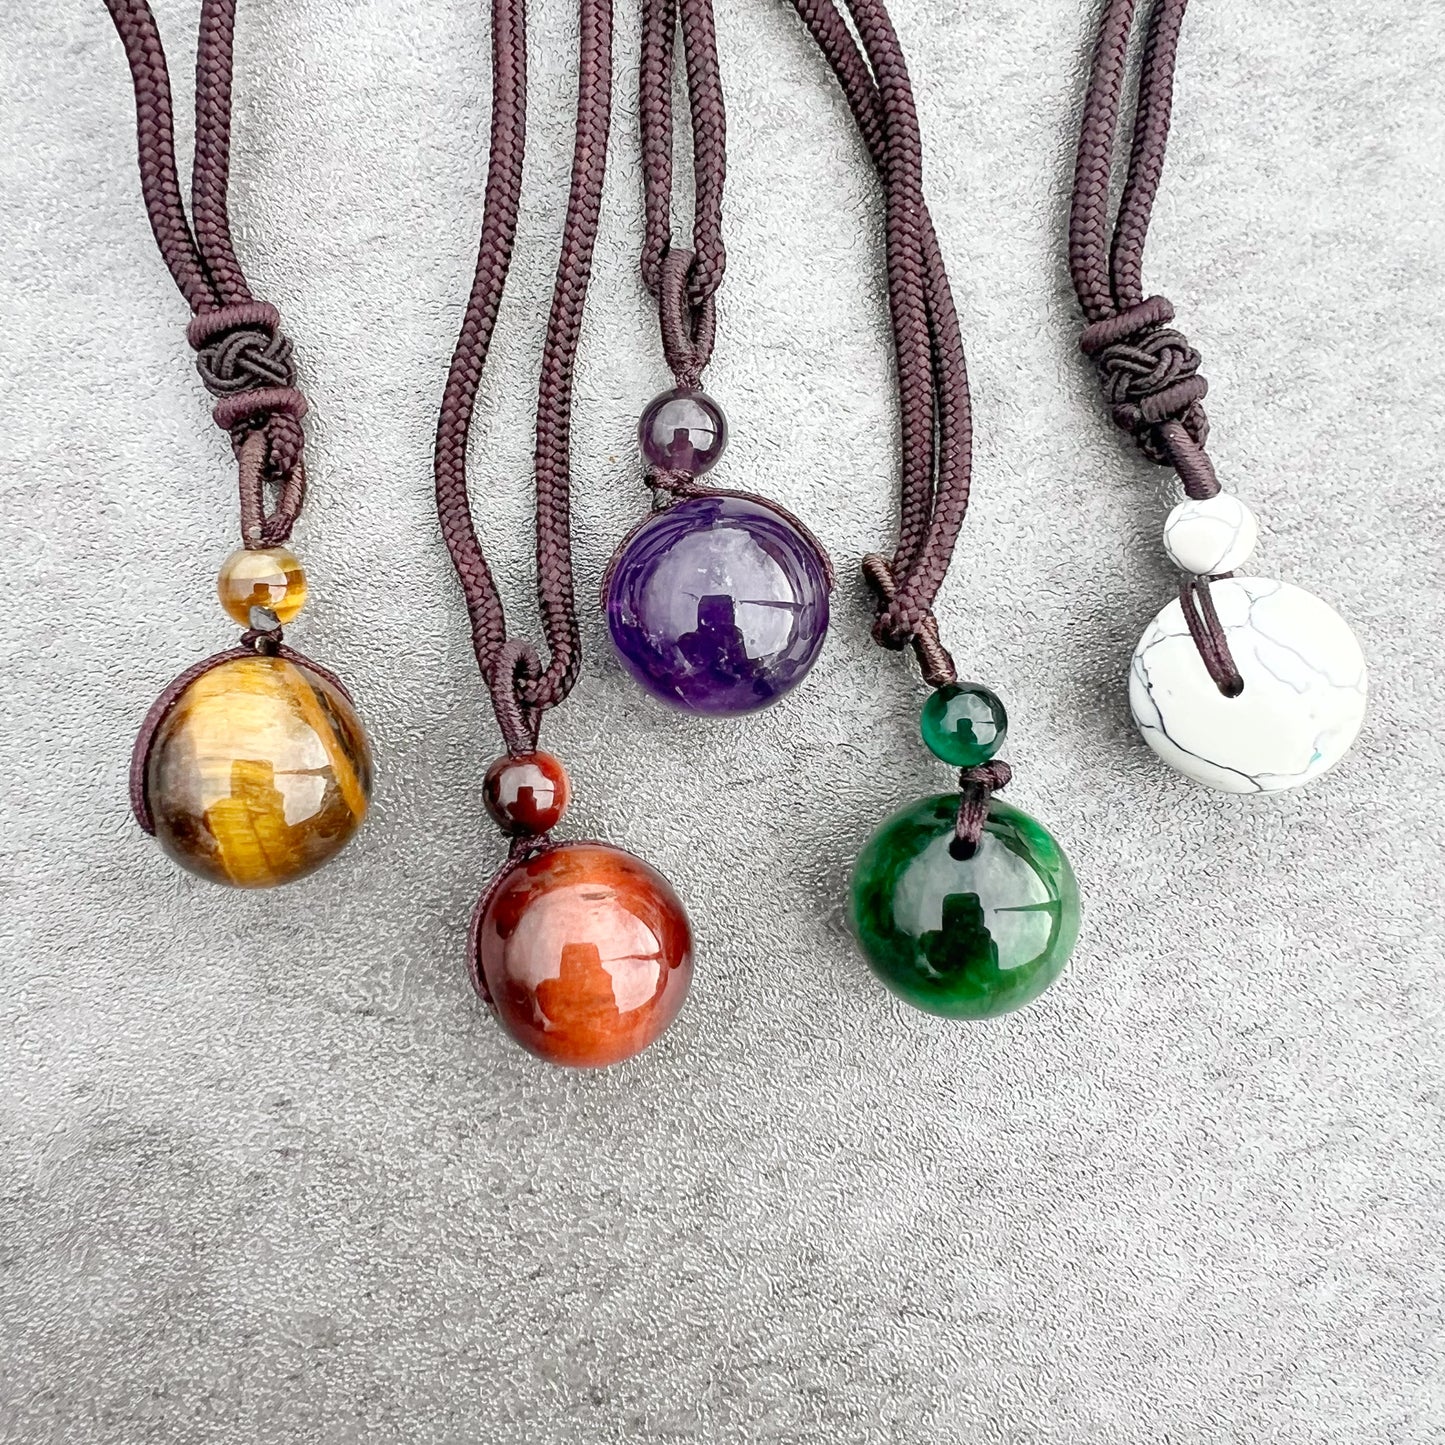 Sphere On A Rope Necklace